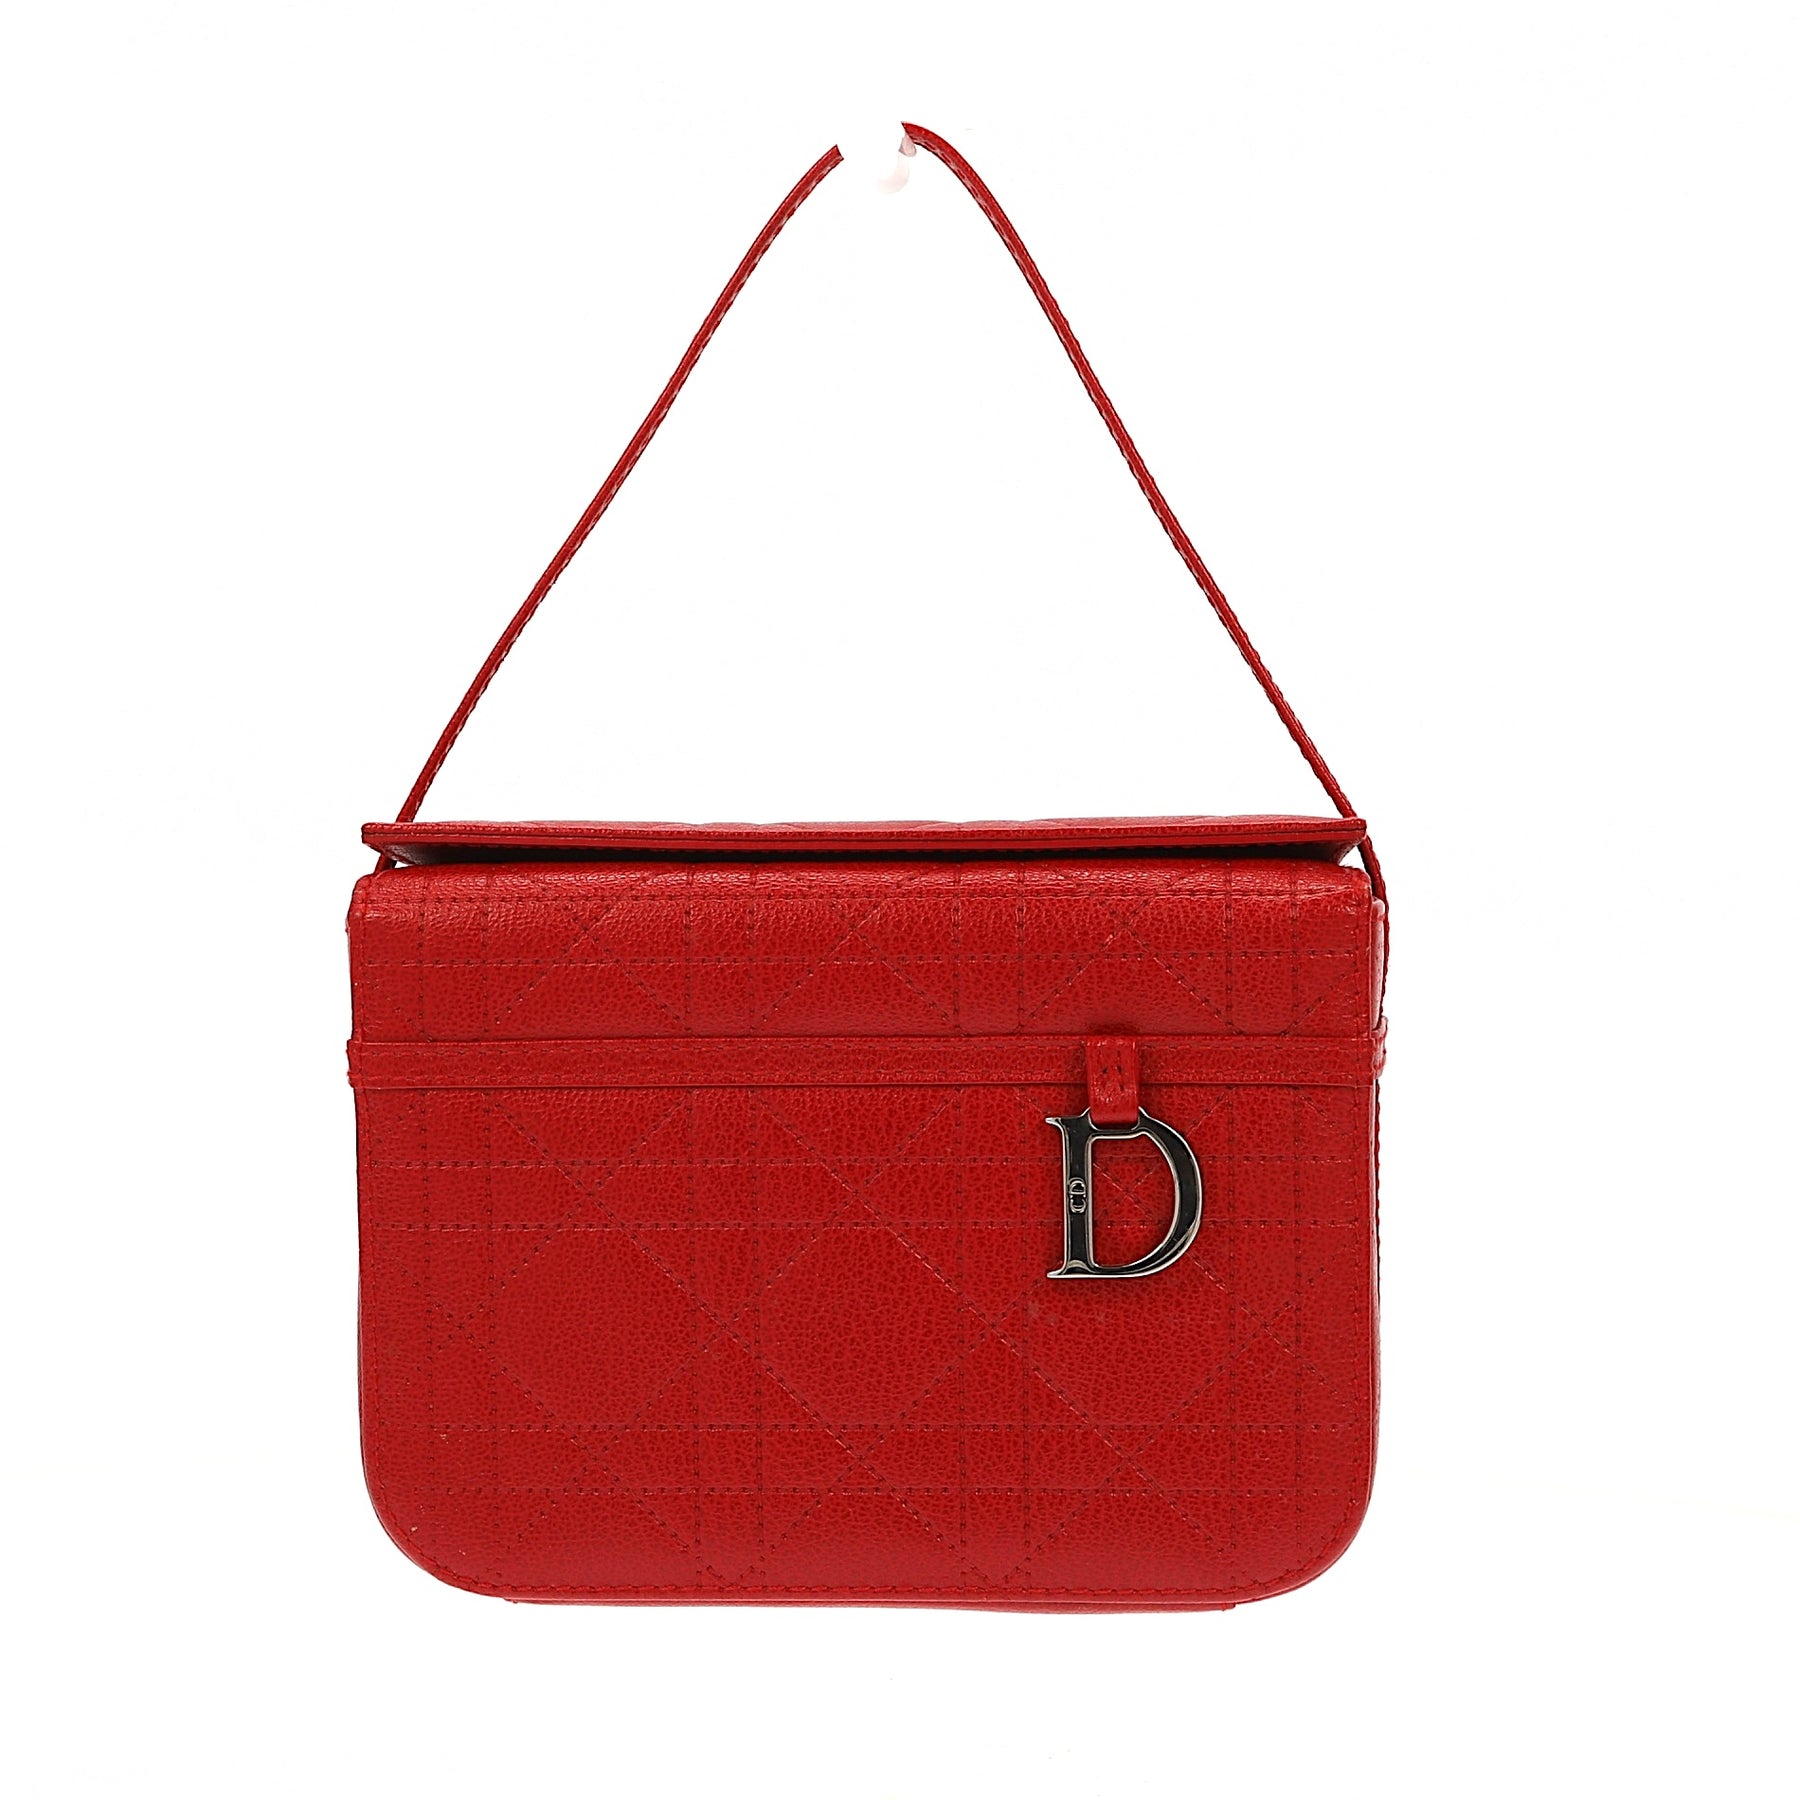 UNBOXING/REVIEW: RED LADY DIOR HANDBAG IN MEDIUM | ANIKA SIGLOS - YouTube